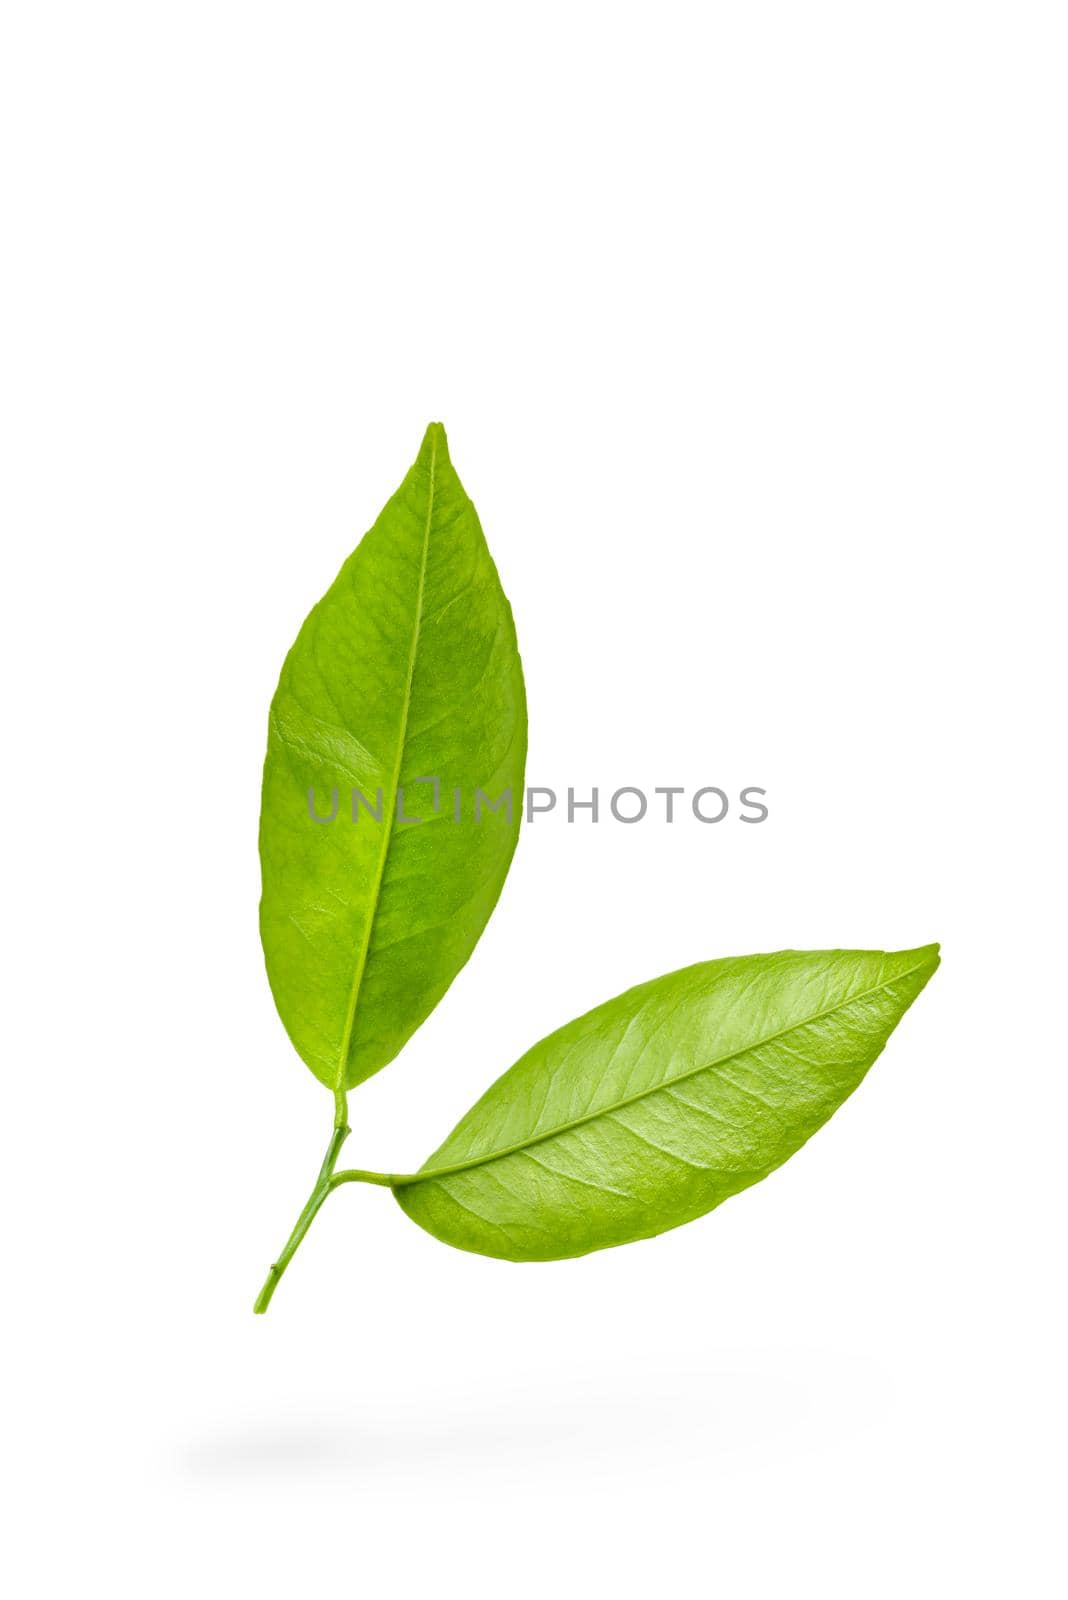 Mandarin leaves. Green leaves of a tangerine tree on a white isolated background. Two leaves dangle casting a shadow.